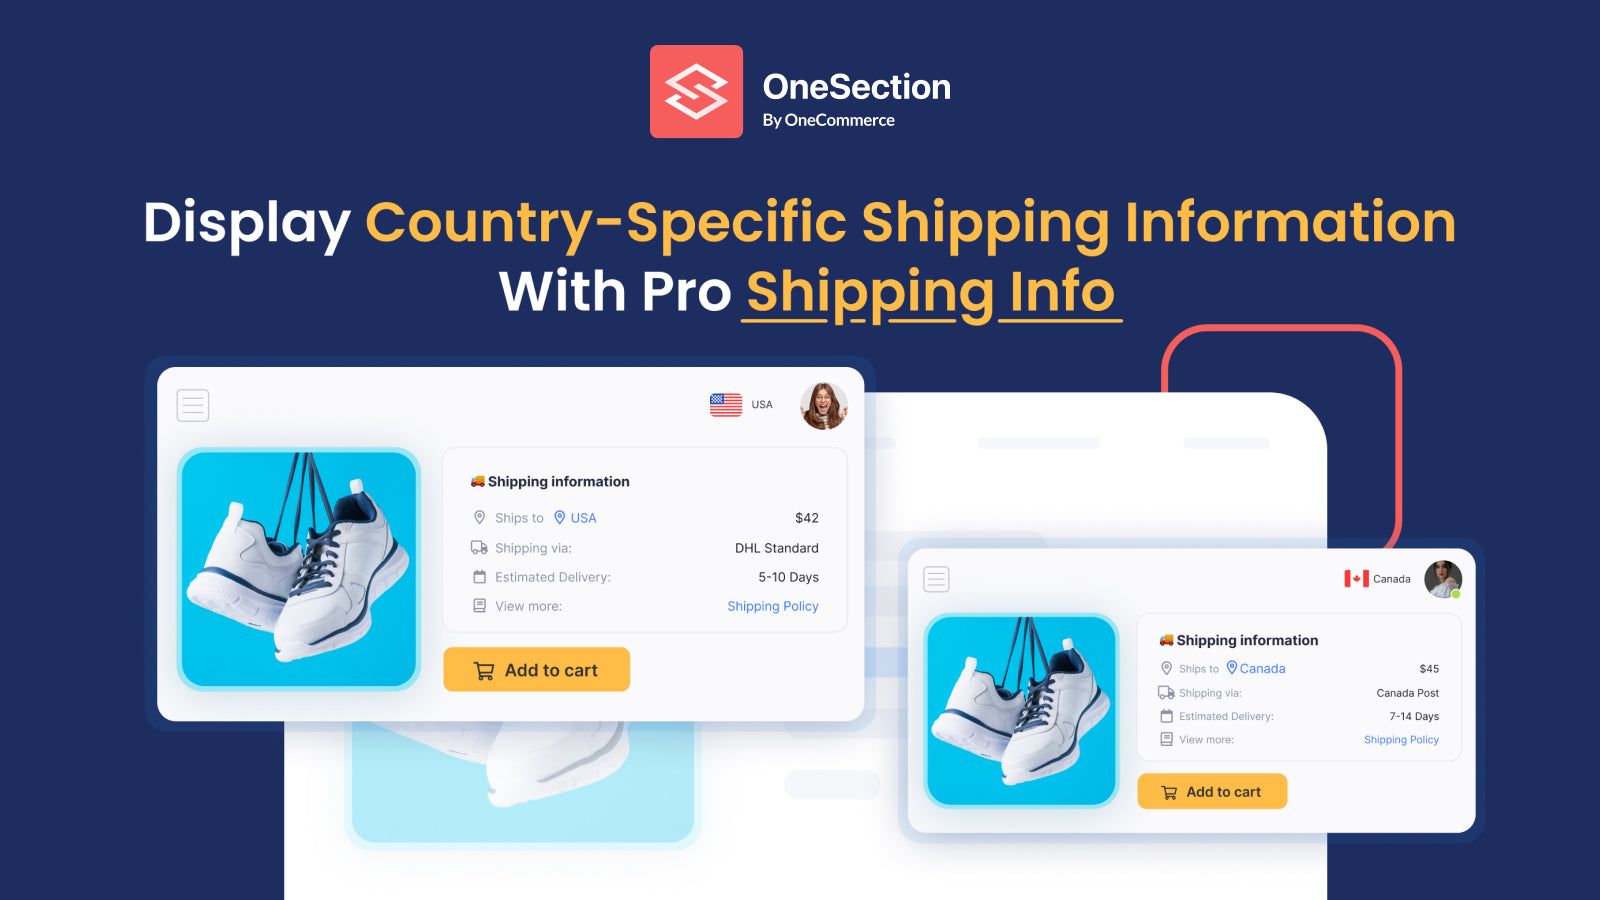 Display country-specific shipping information